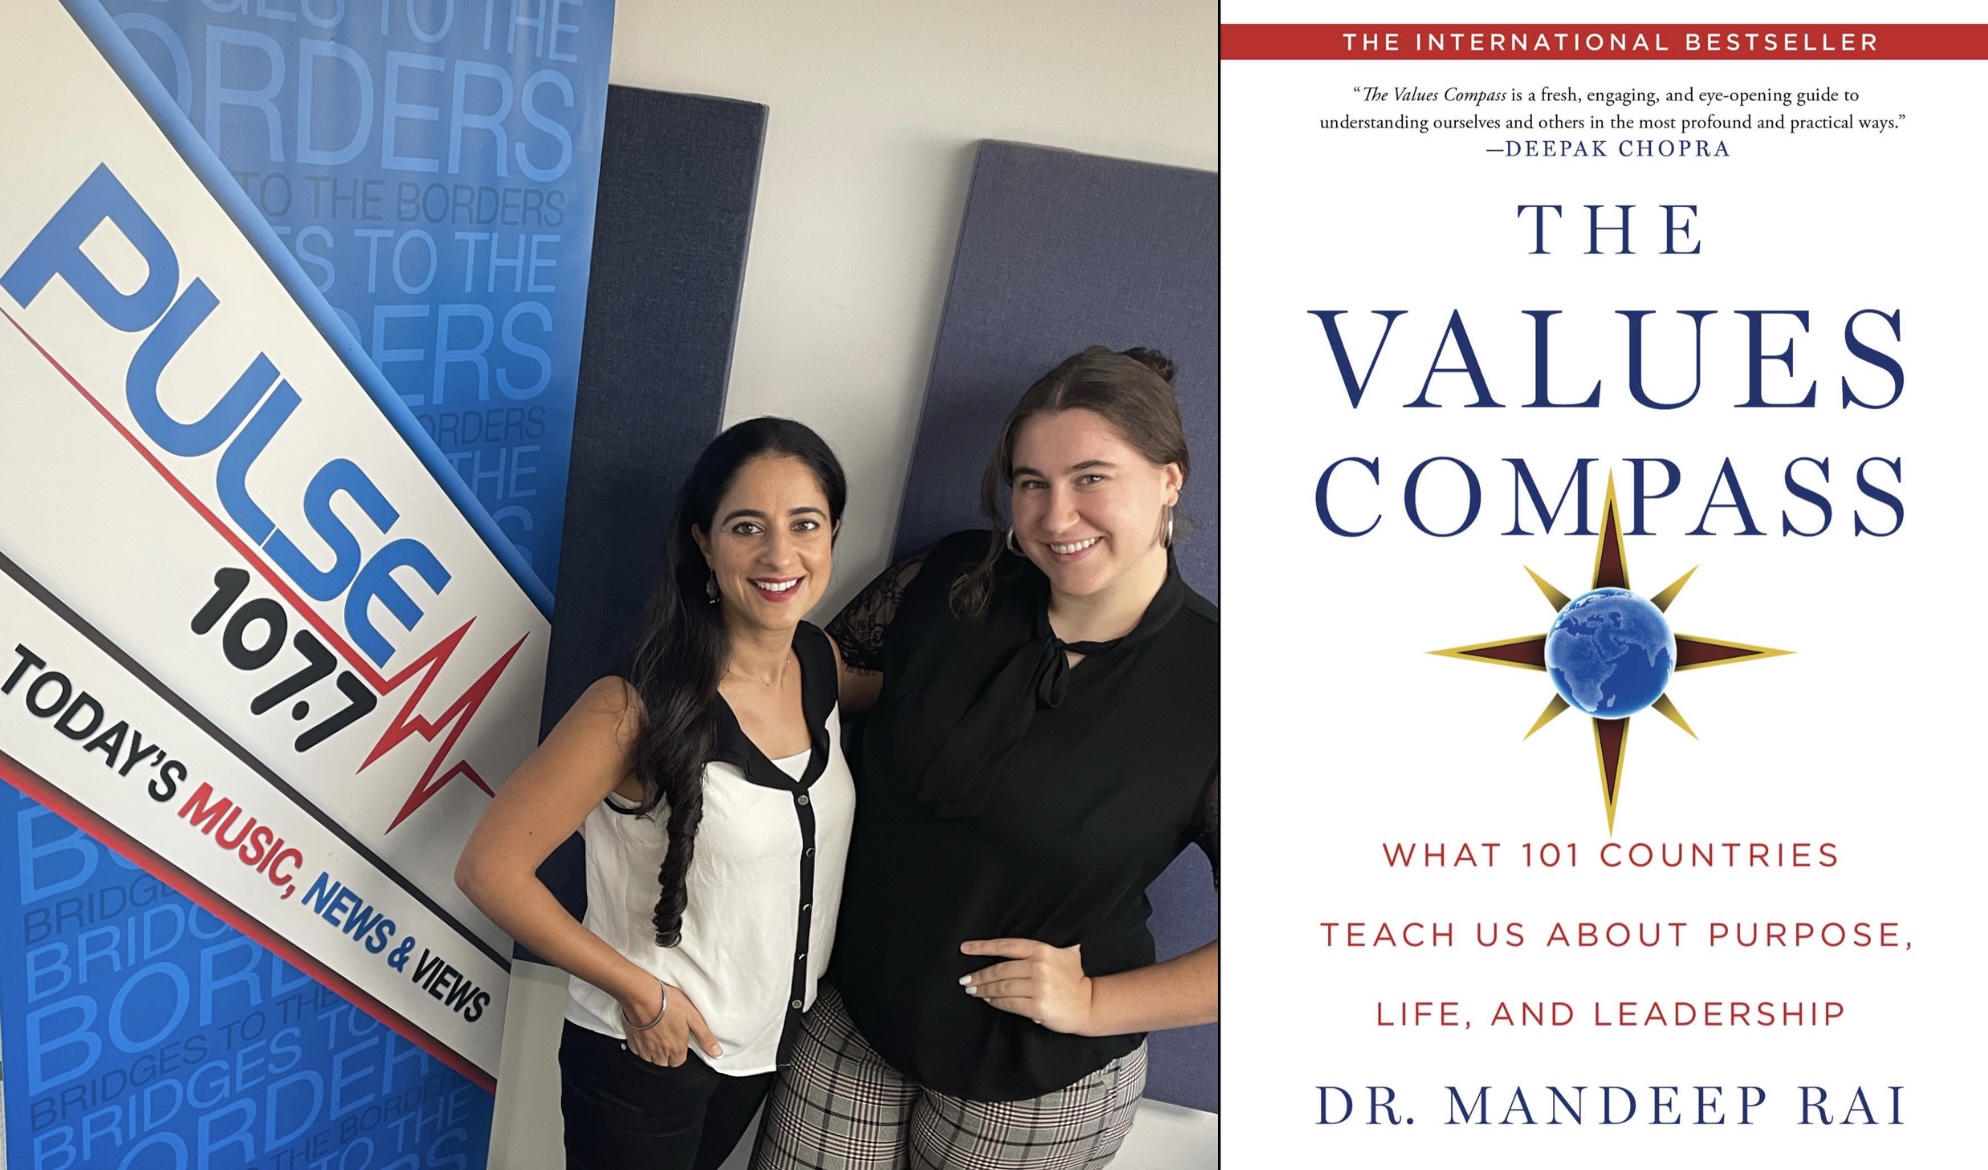 Kate Tattersall Interviews Author of “The Values Compass” Dr Mandeep Rai